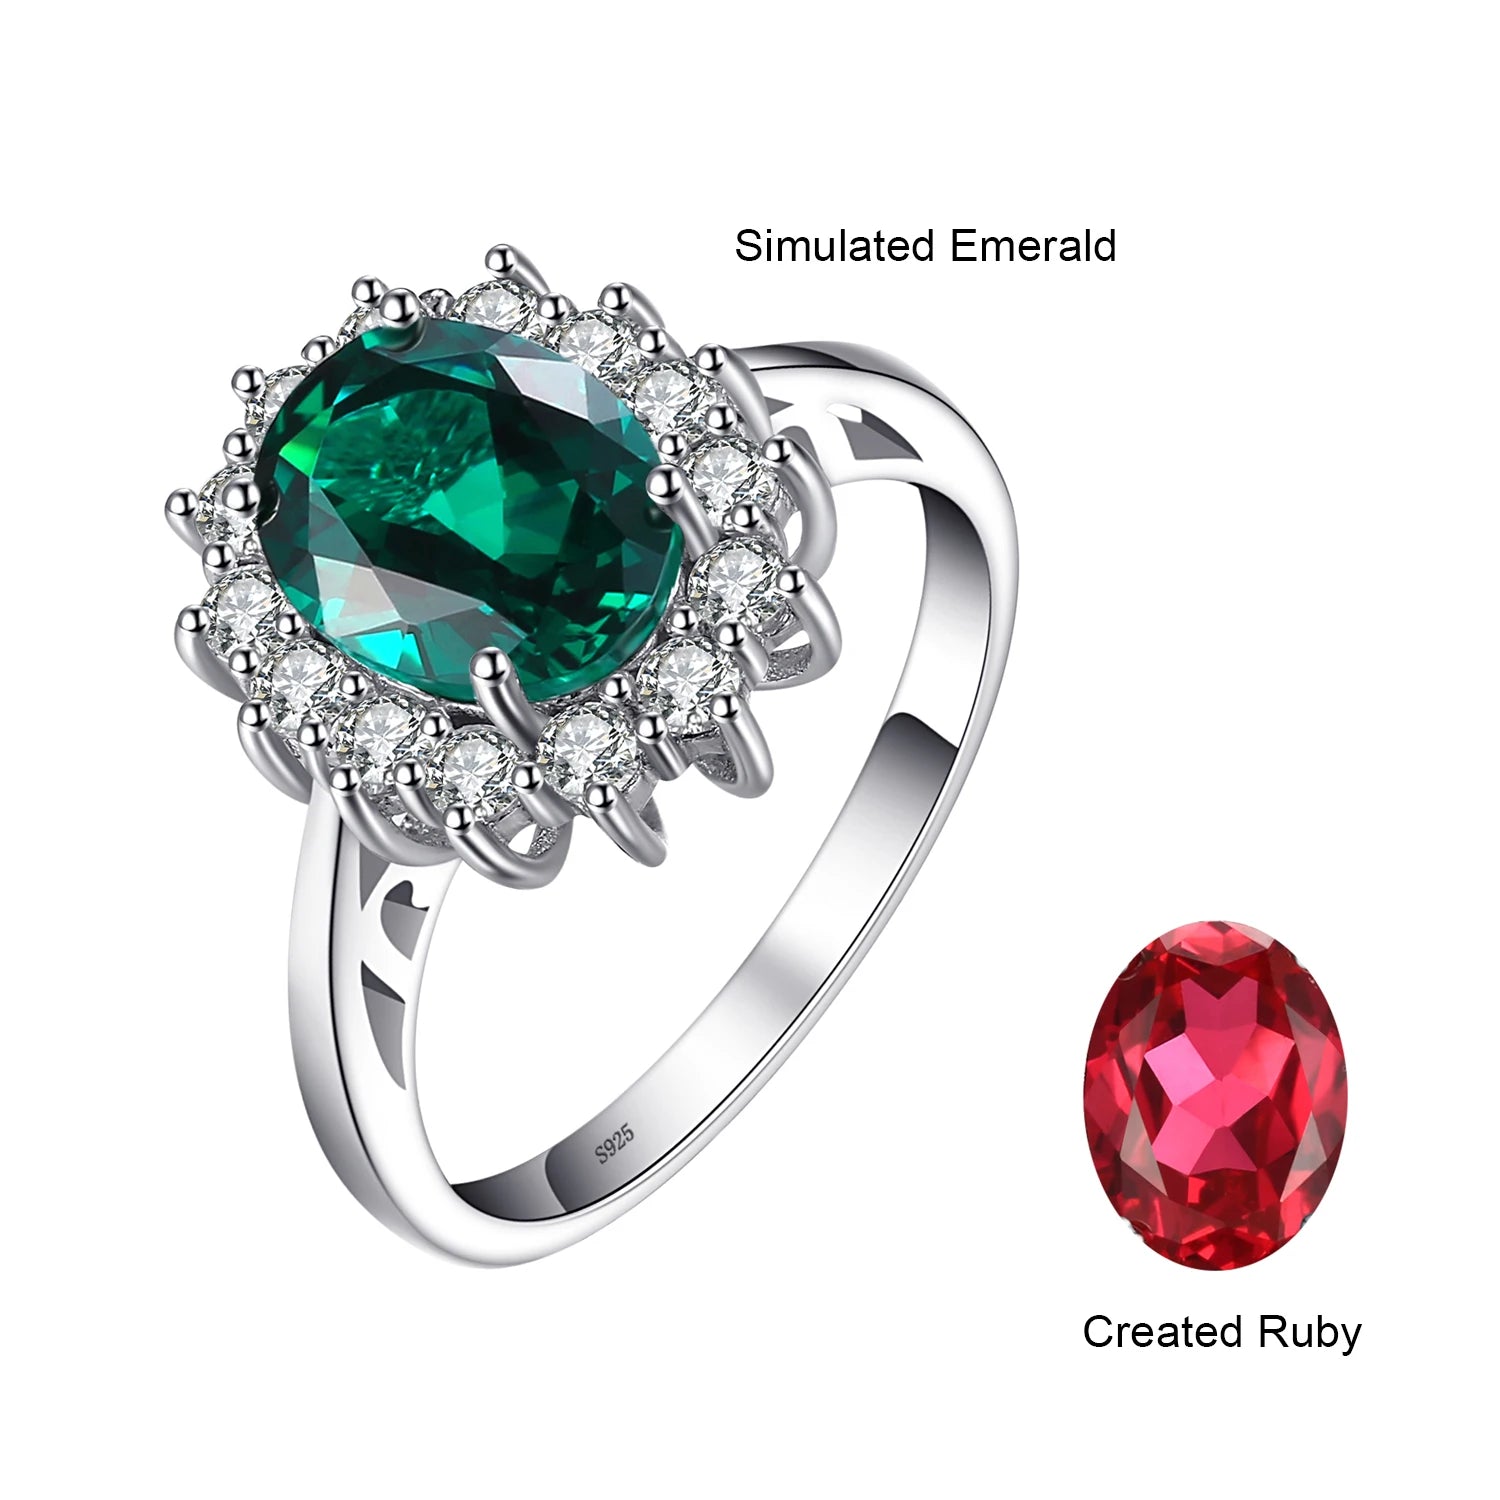 Princess Diana Simulated Emerald Created Ruby 925 Sterling Silver Halo Ring for Women Yellow Gold Rose Gold Plated